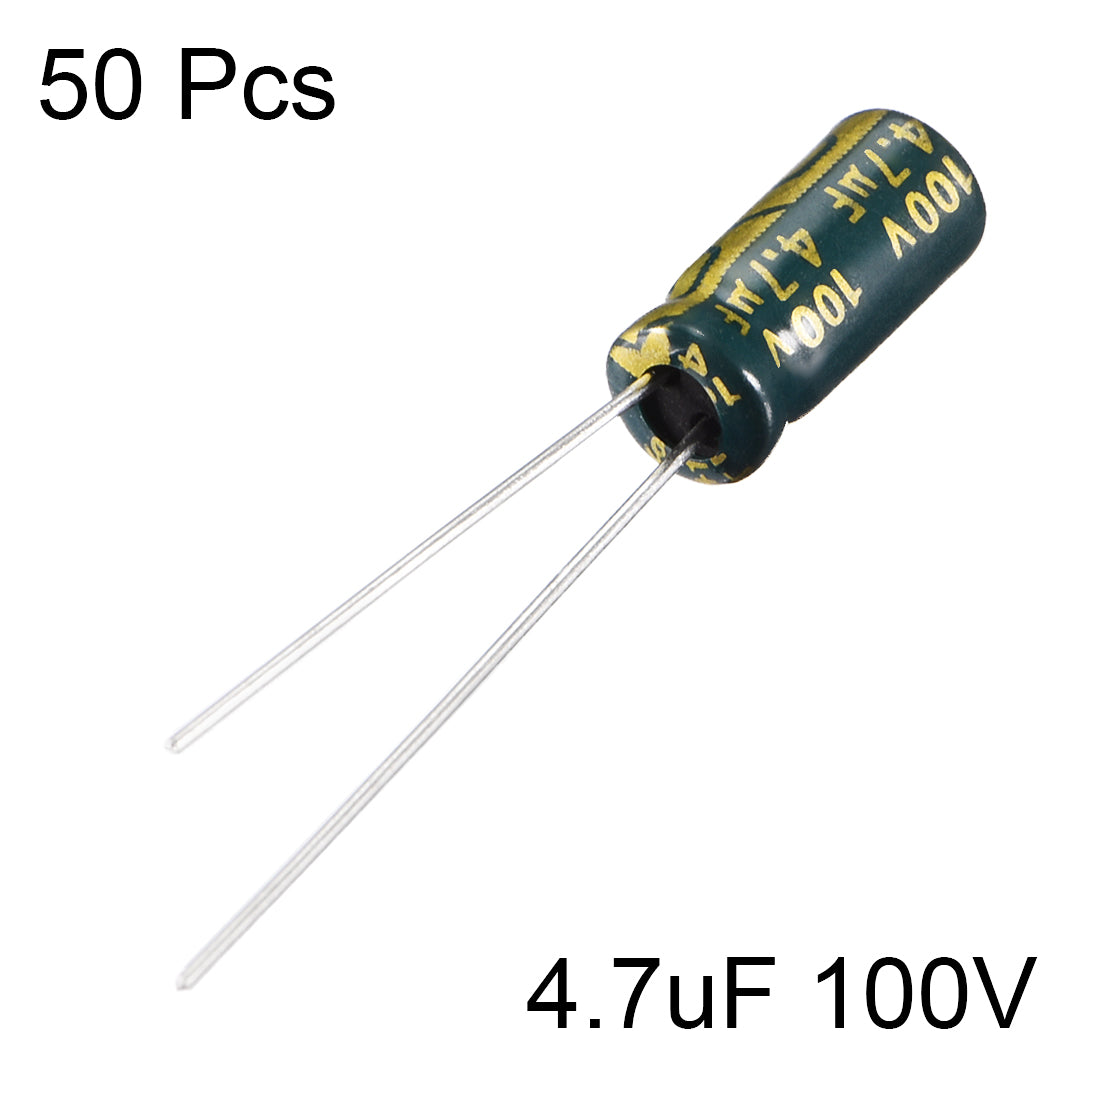 uxcell Uxcell Aluminum Radial Electrolytic Capacitor Low ESR 4.7uF 100V 105 Celsius 3000H Life 5x11mm High Ripple Current Low Impedance 50pcs Green